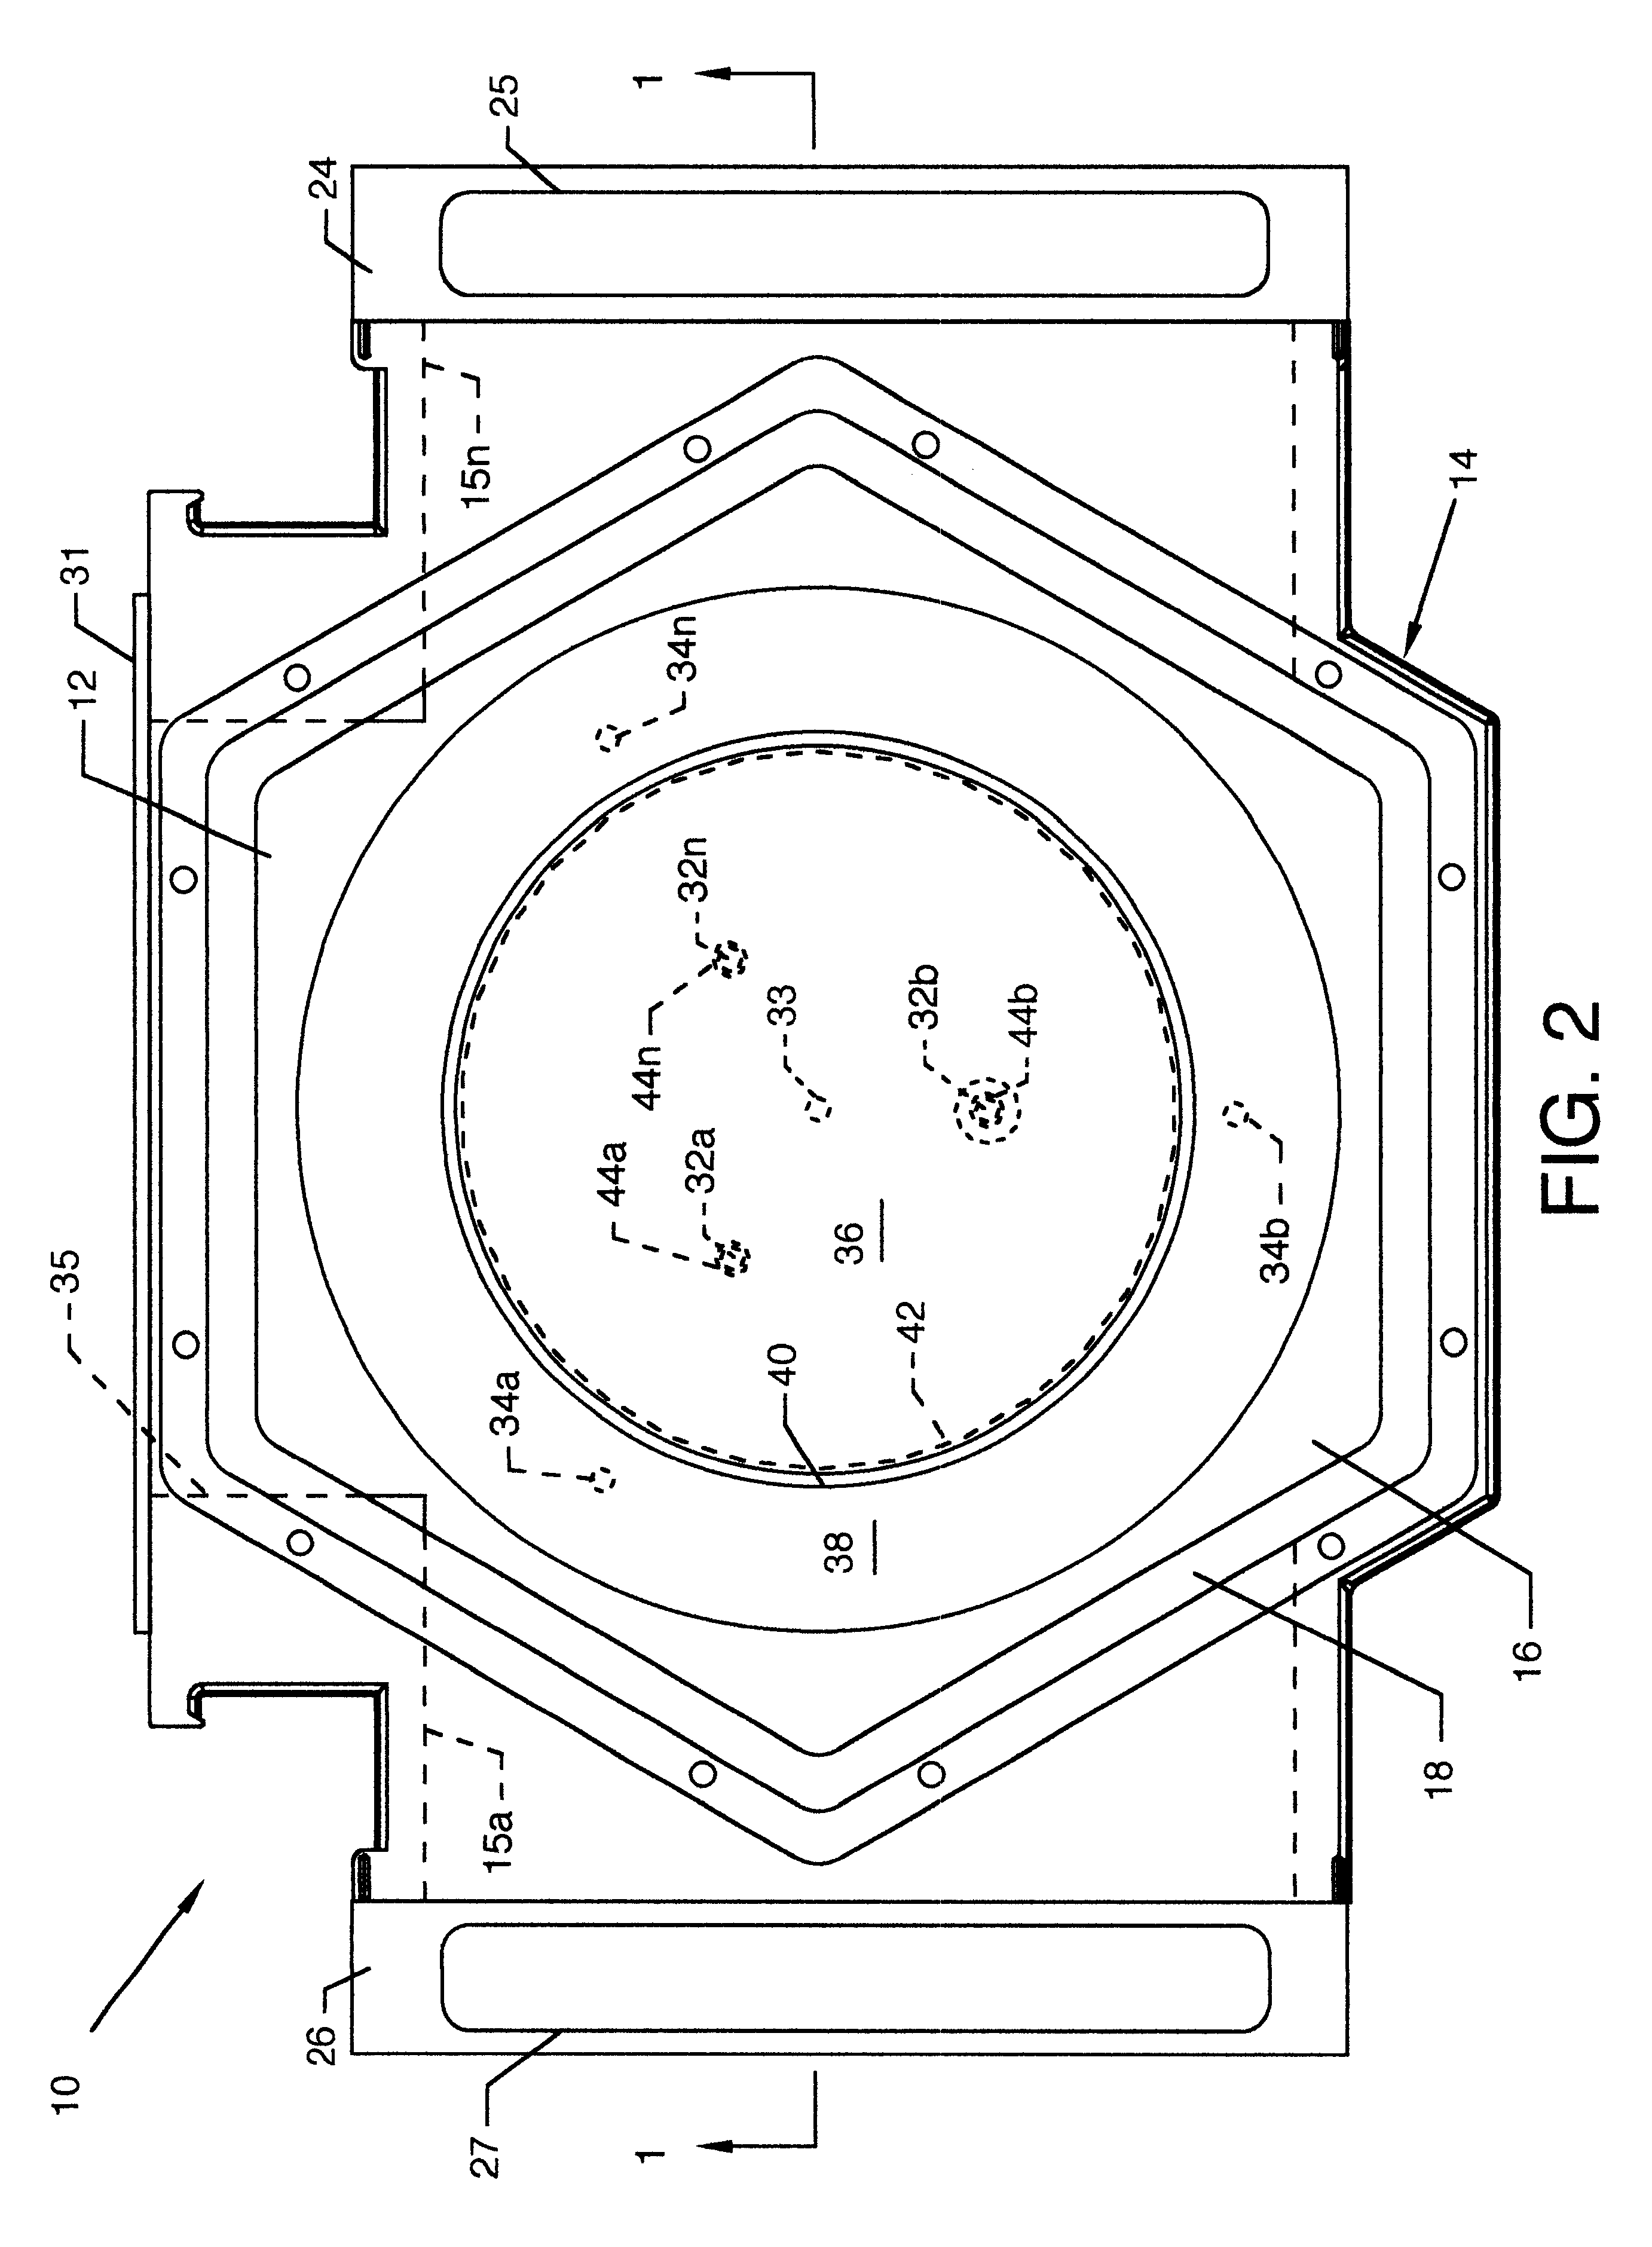 Method and apparatus for uniform direct radiant heating in a rapid thermal processing reactor